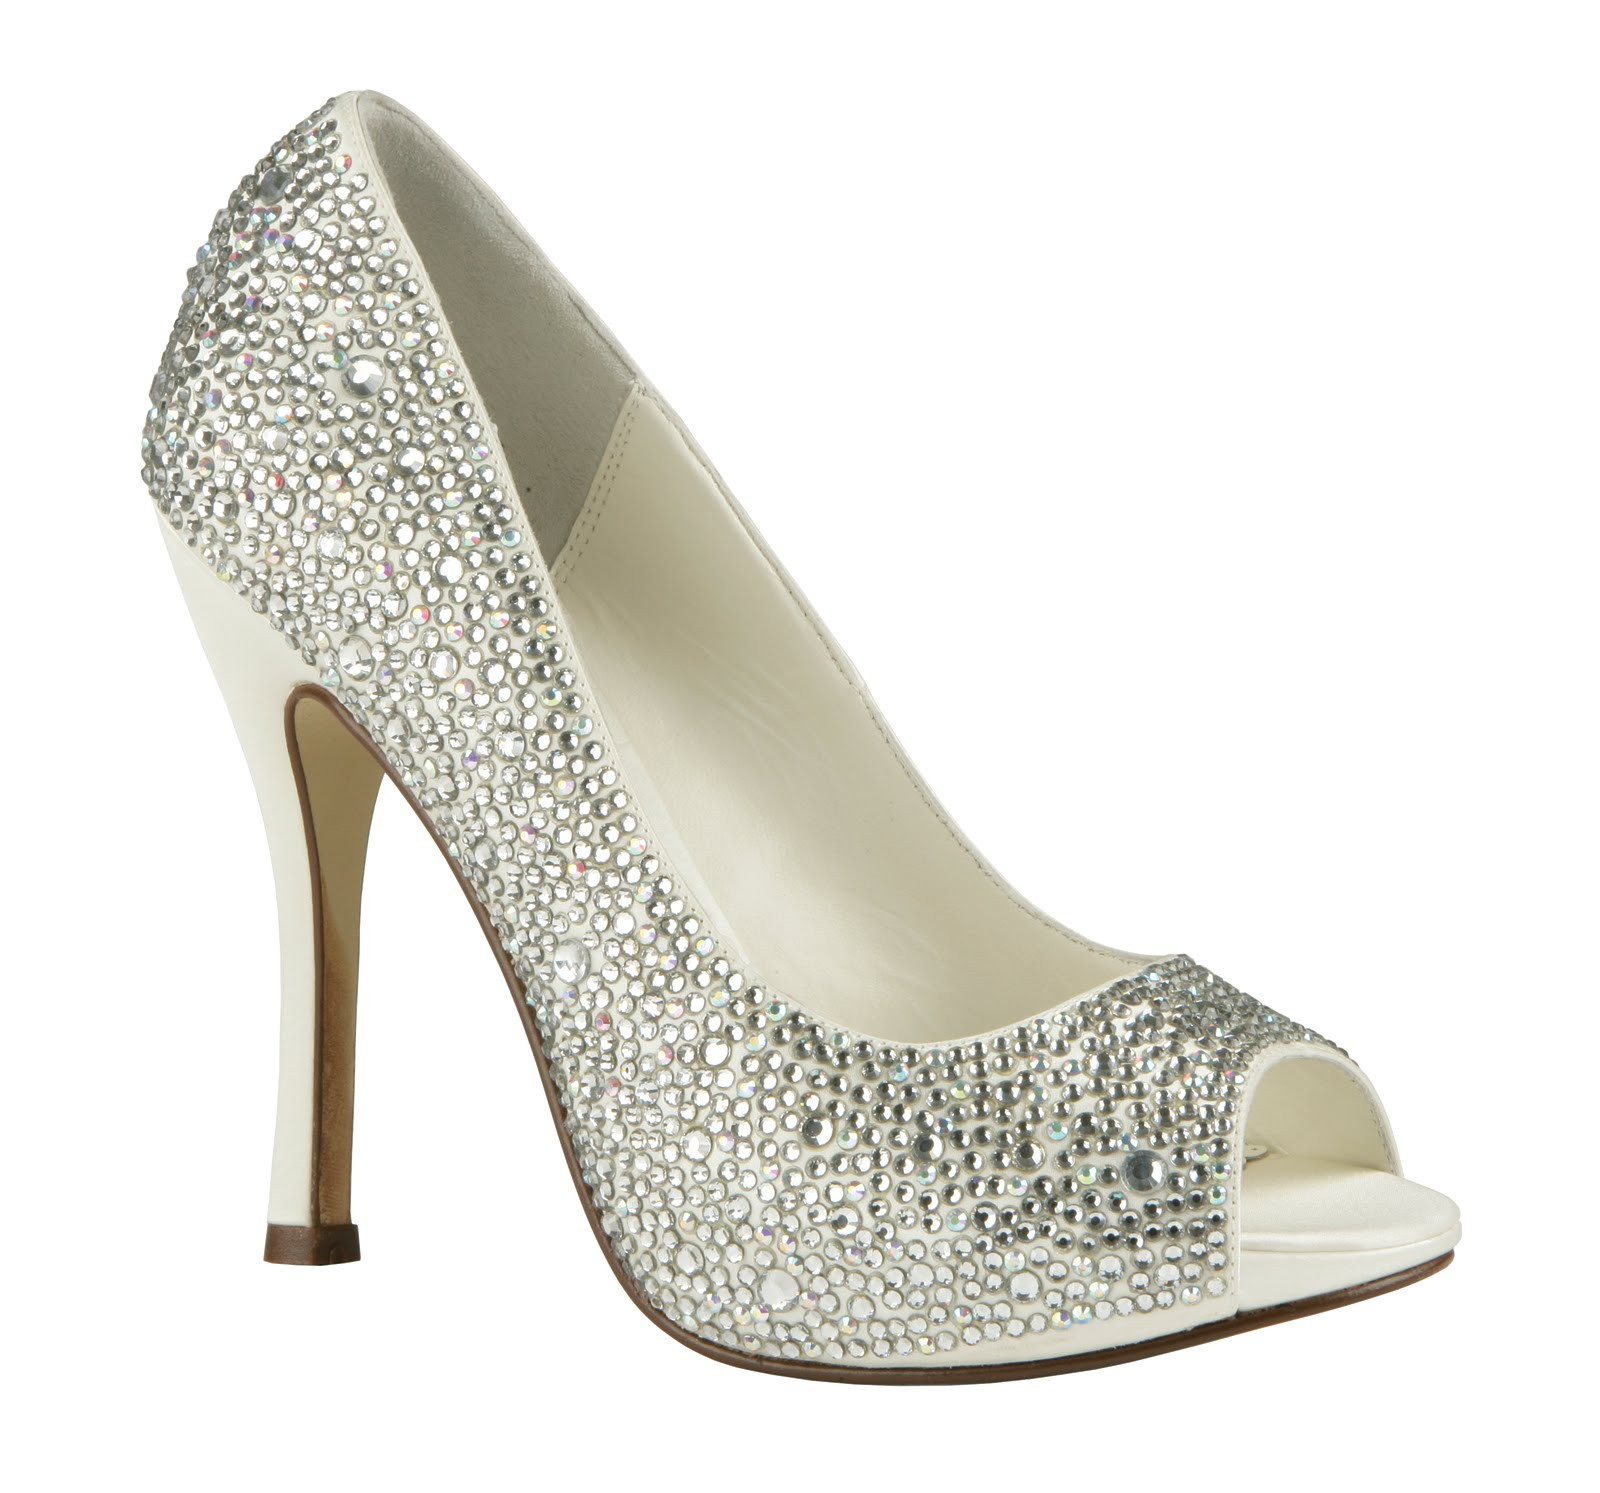 Shoes For A Wedding
 Everything But The Dress All Crystal Bridal Shoes by